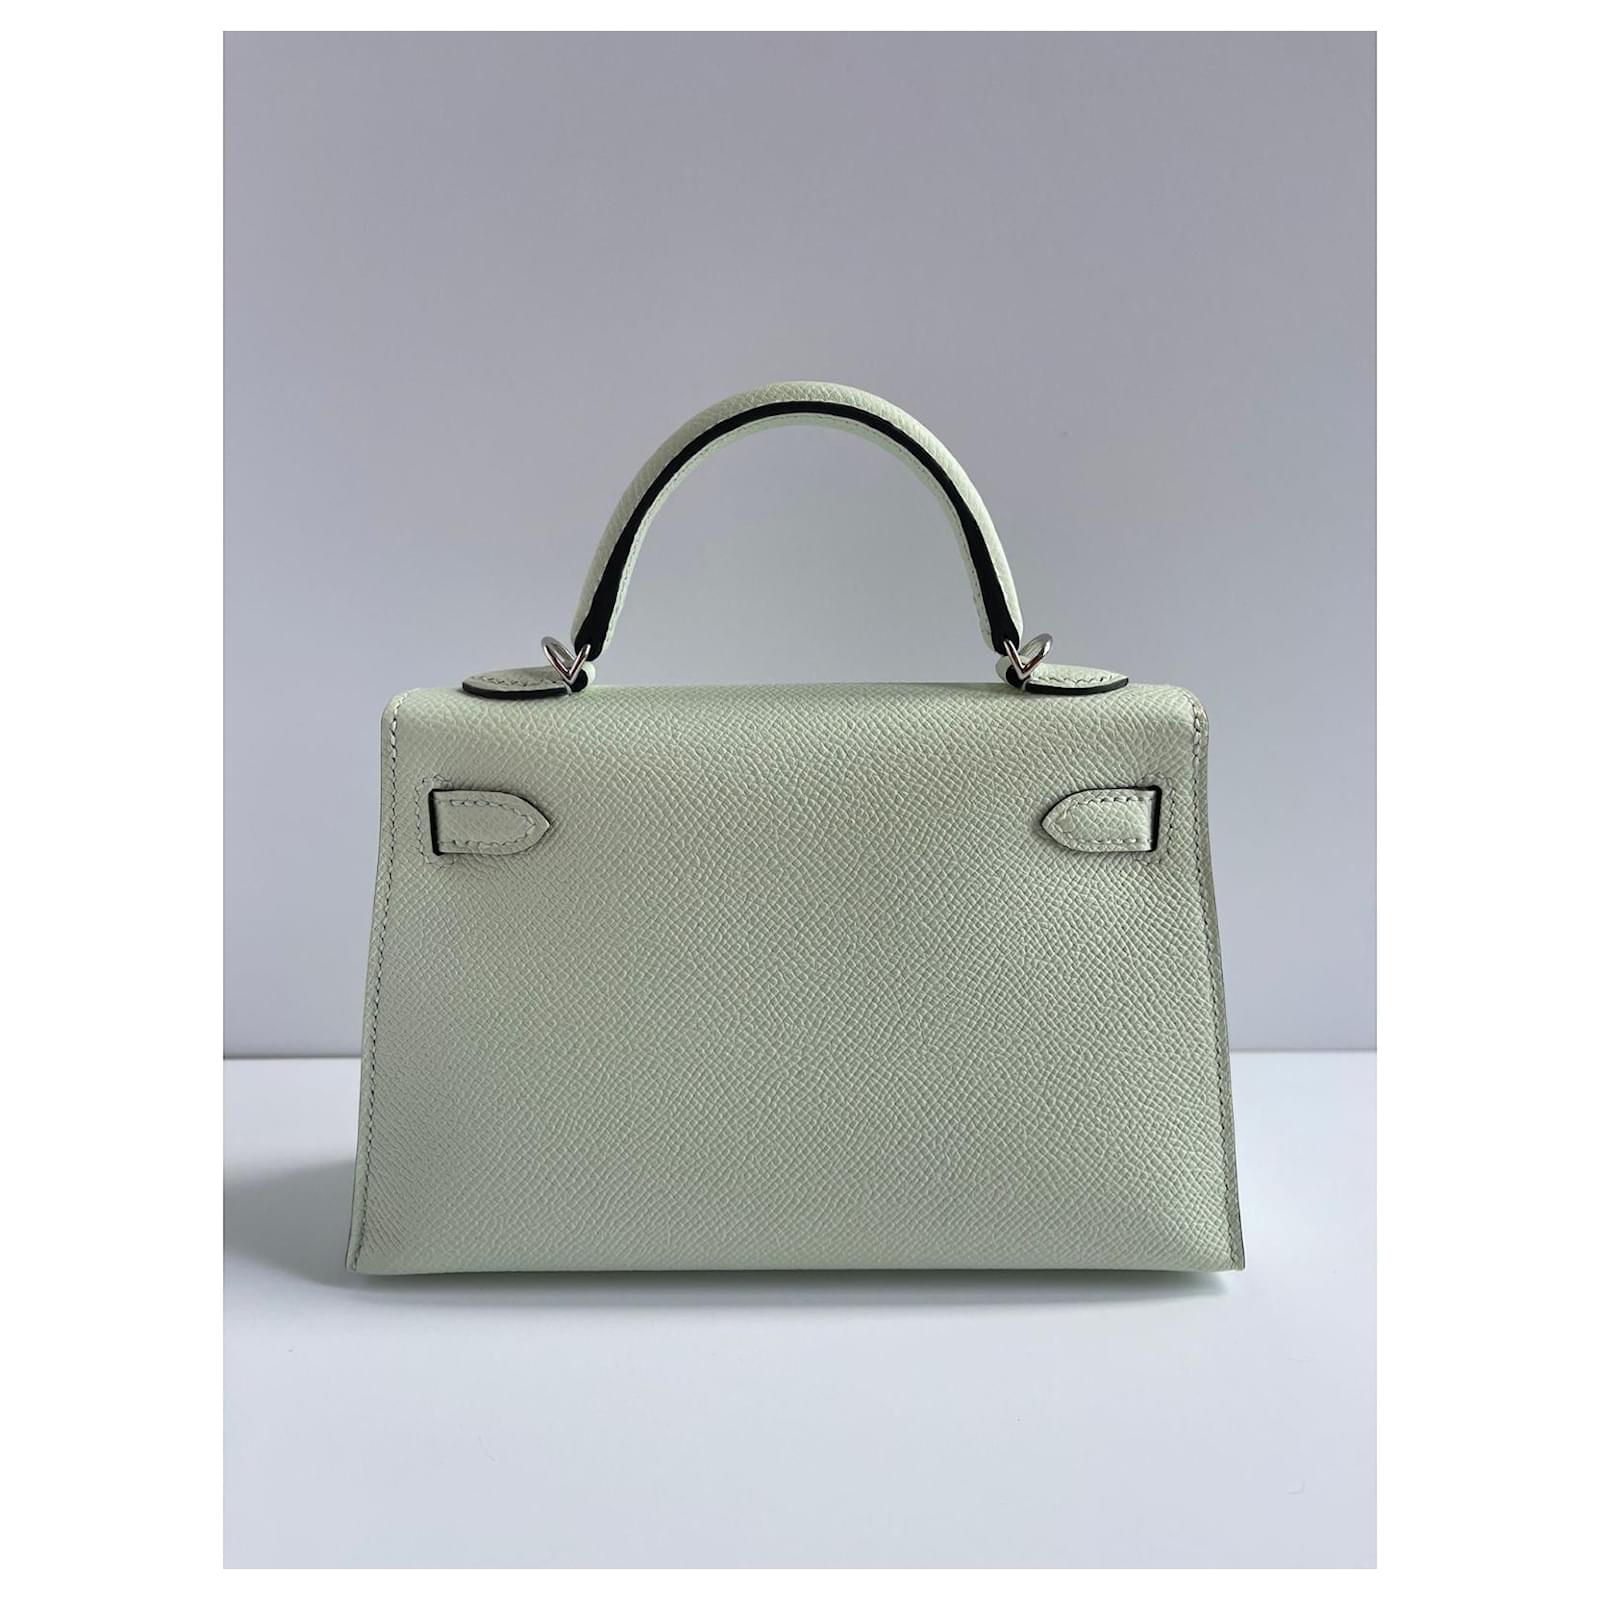 Hermès Mini Kelly with silver hardware never worn Green Leather